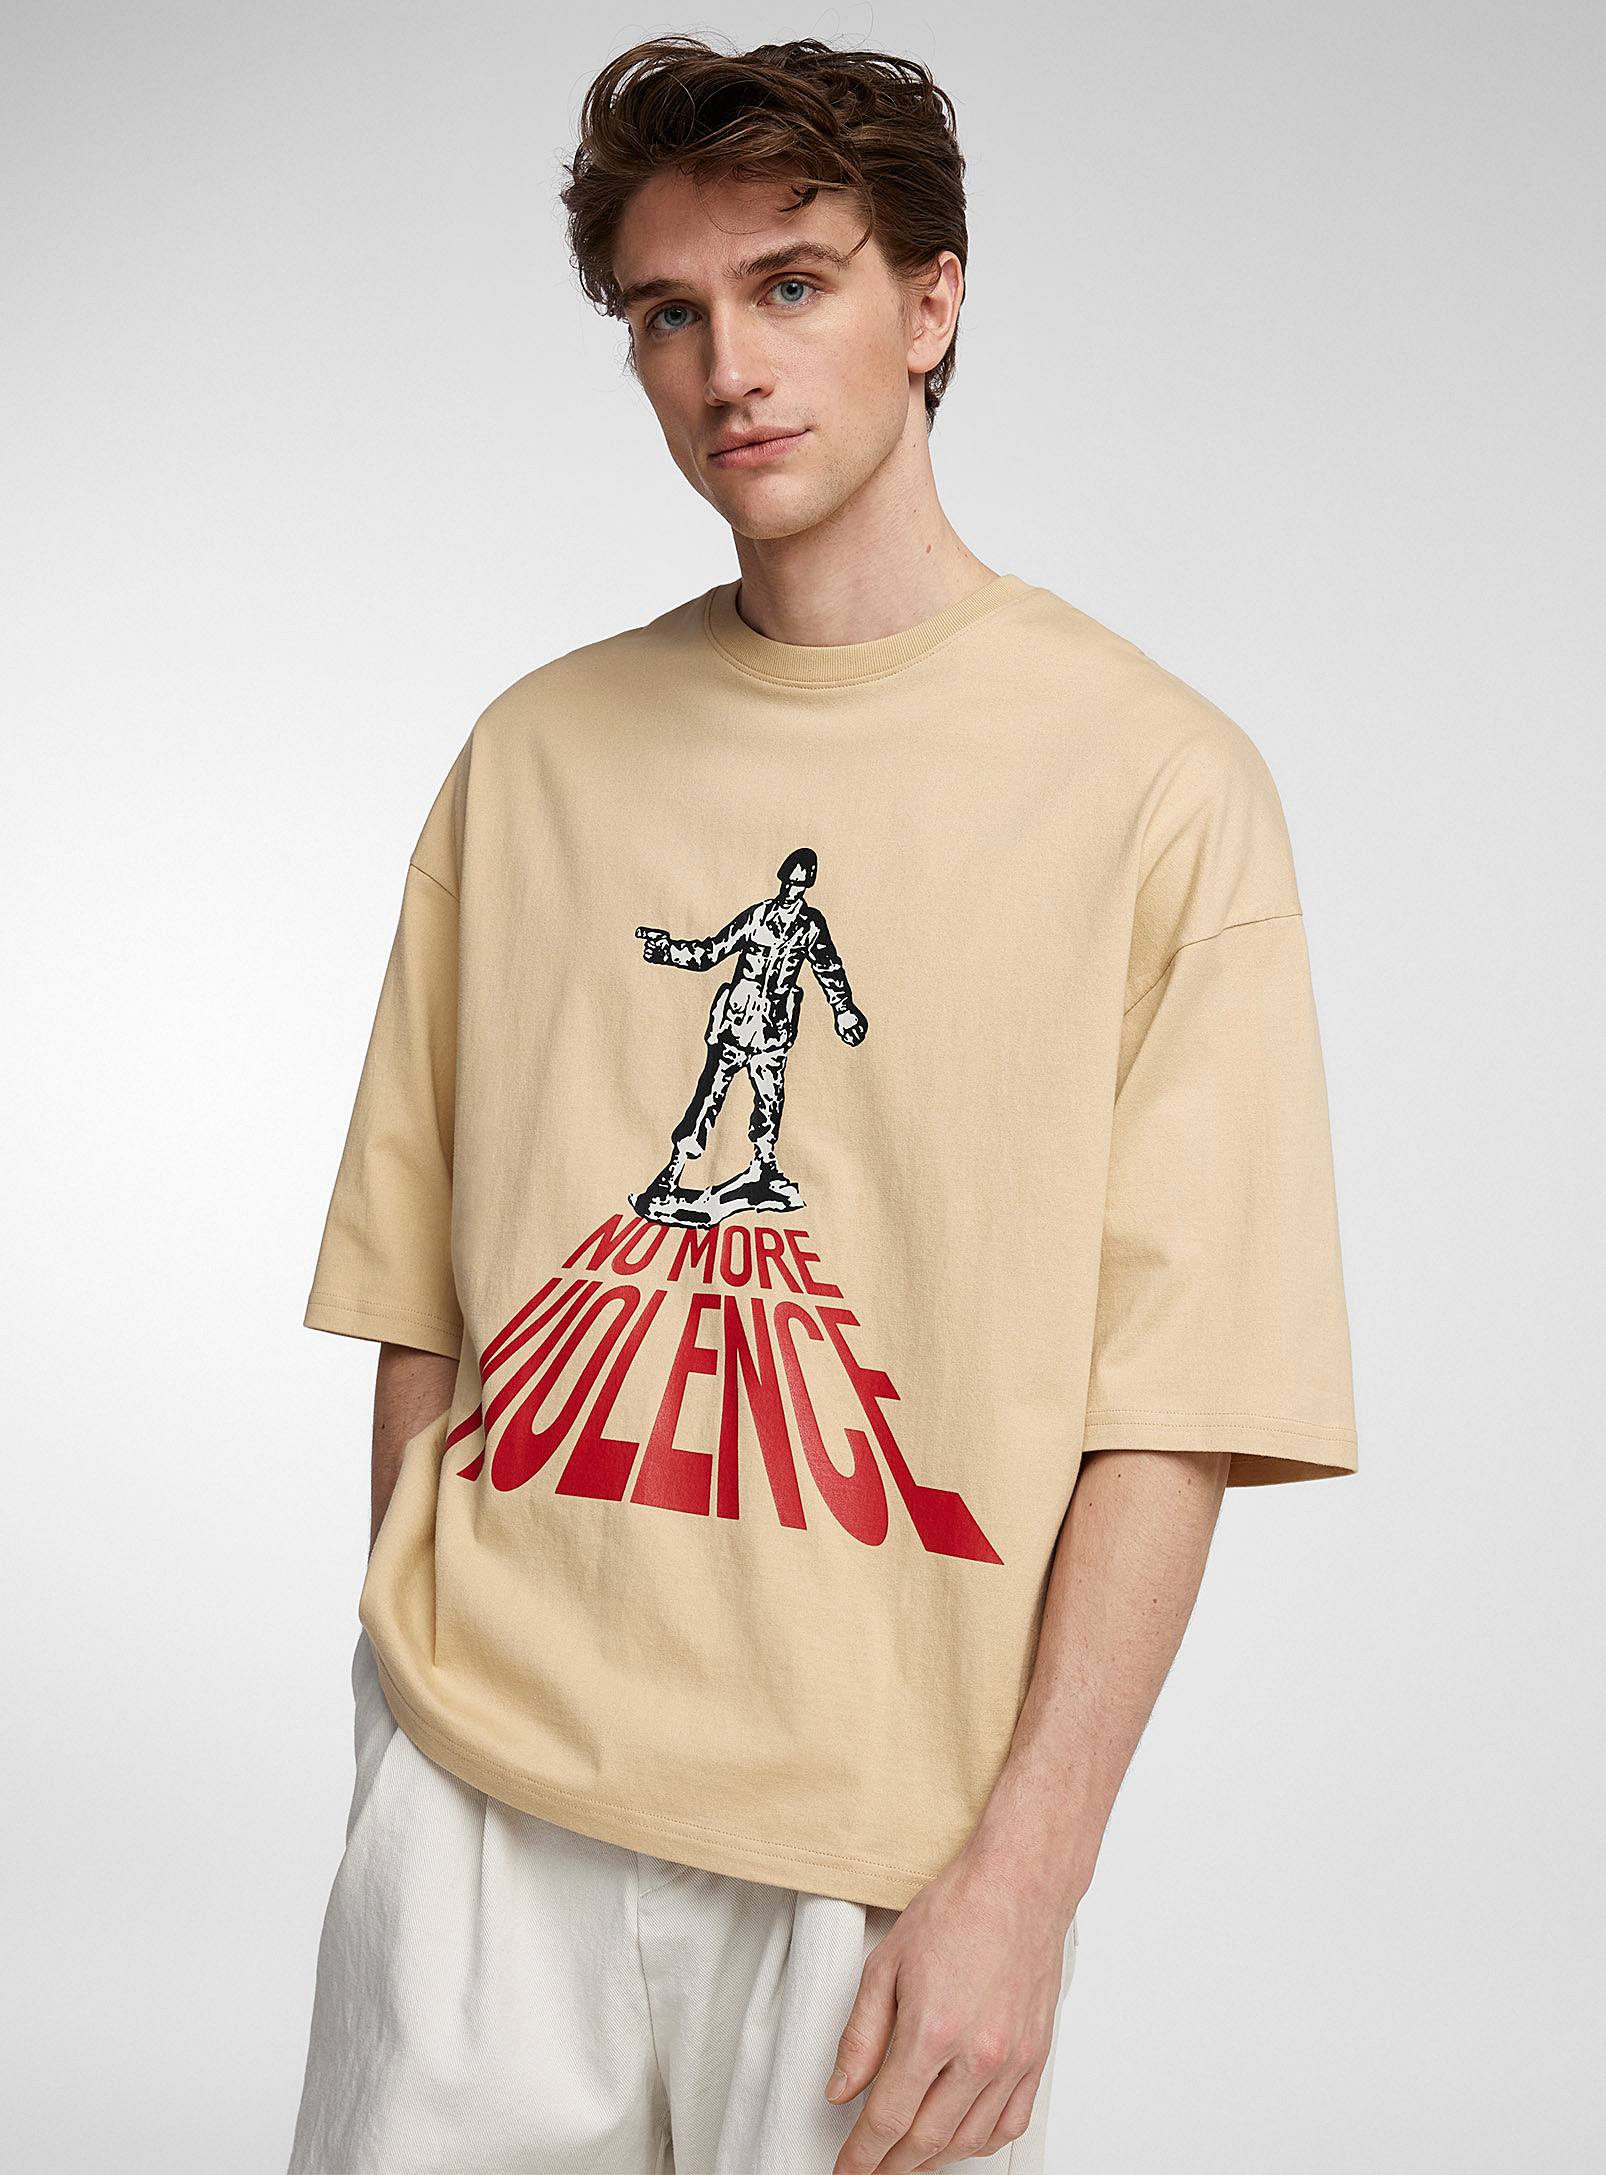 Tee Library No More Violence T-shirt In Cream Beige